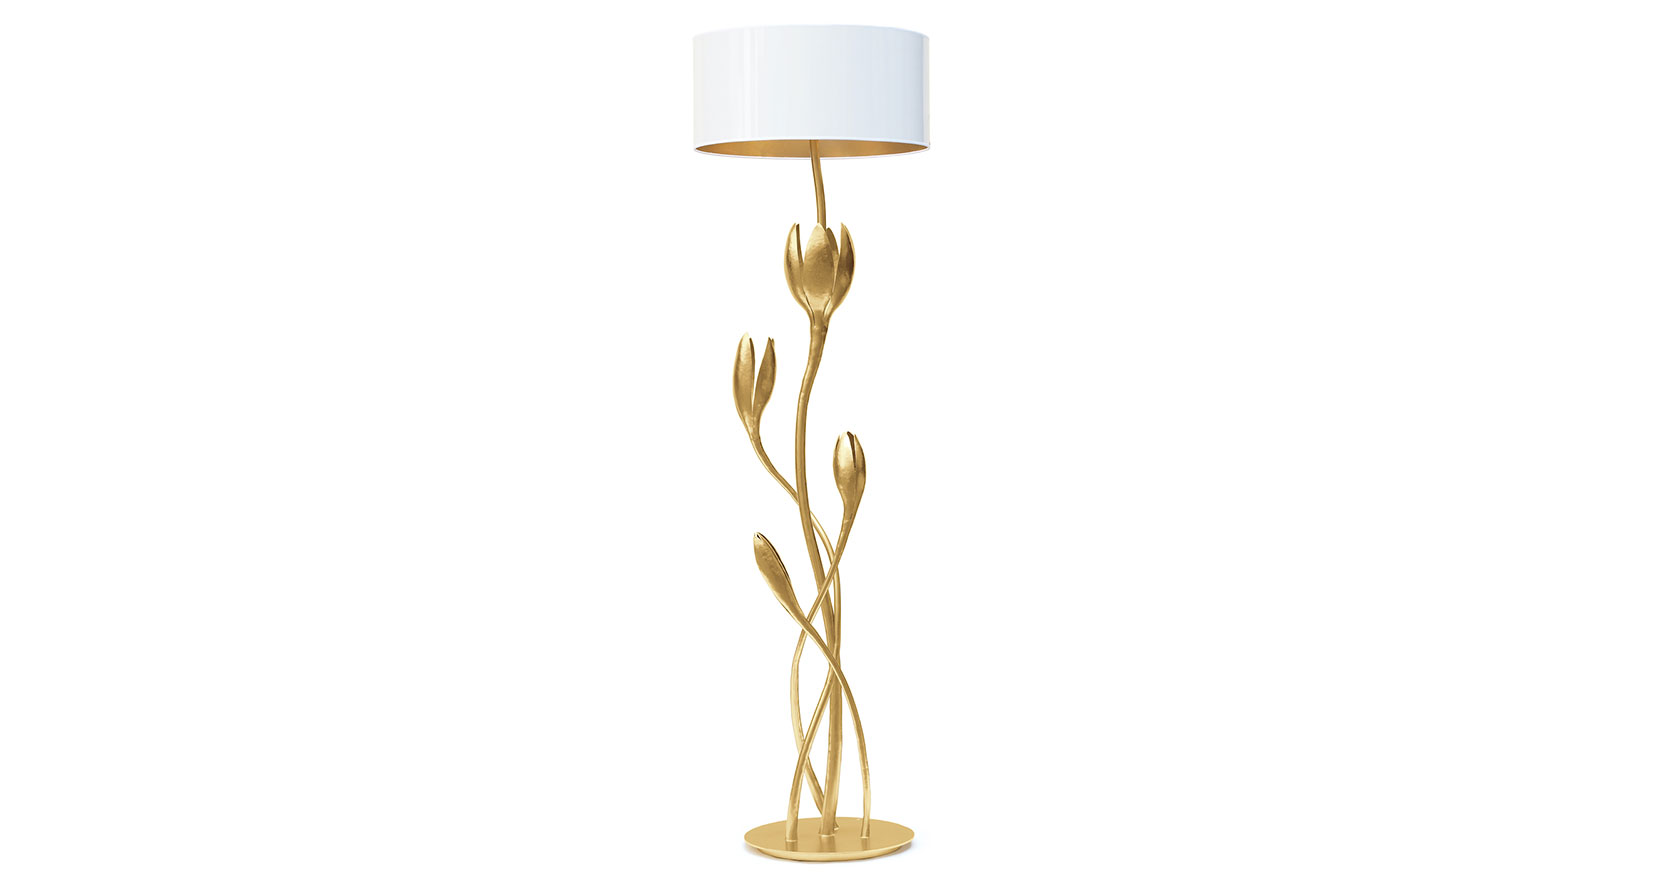 Eric Robin, spectacular sculptural floor lamp, with a round base in gilded wrought iron and stems of large stylized flowers, large oval white lampshade